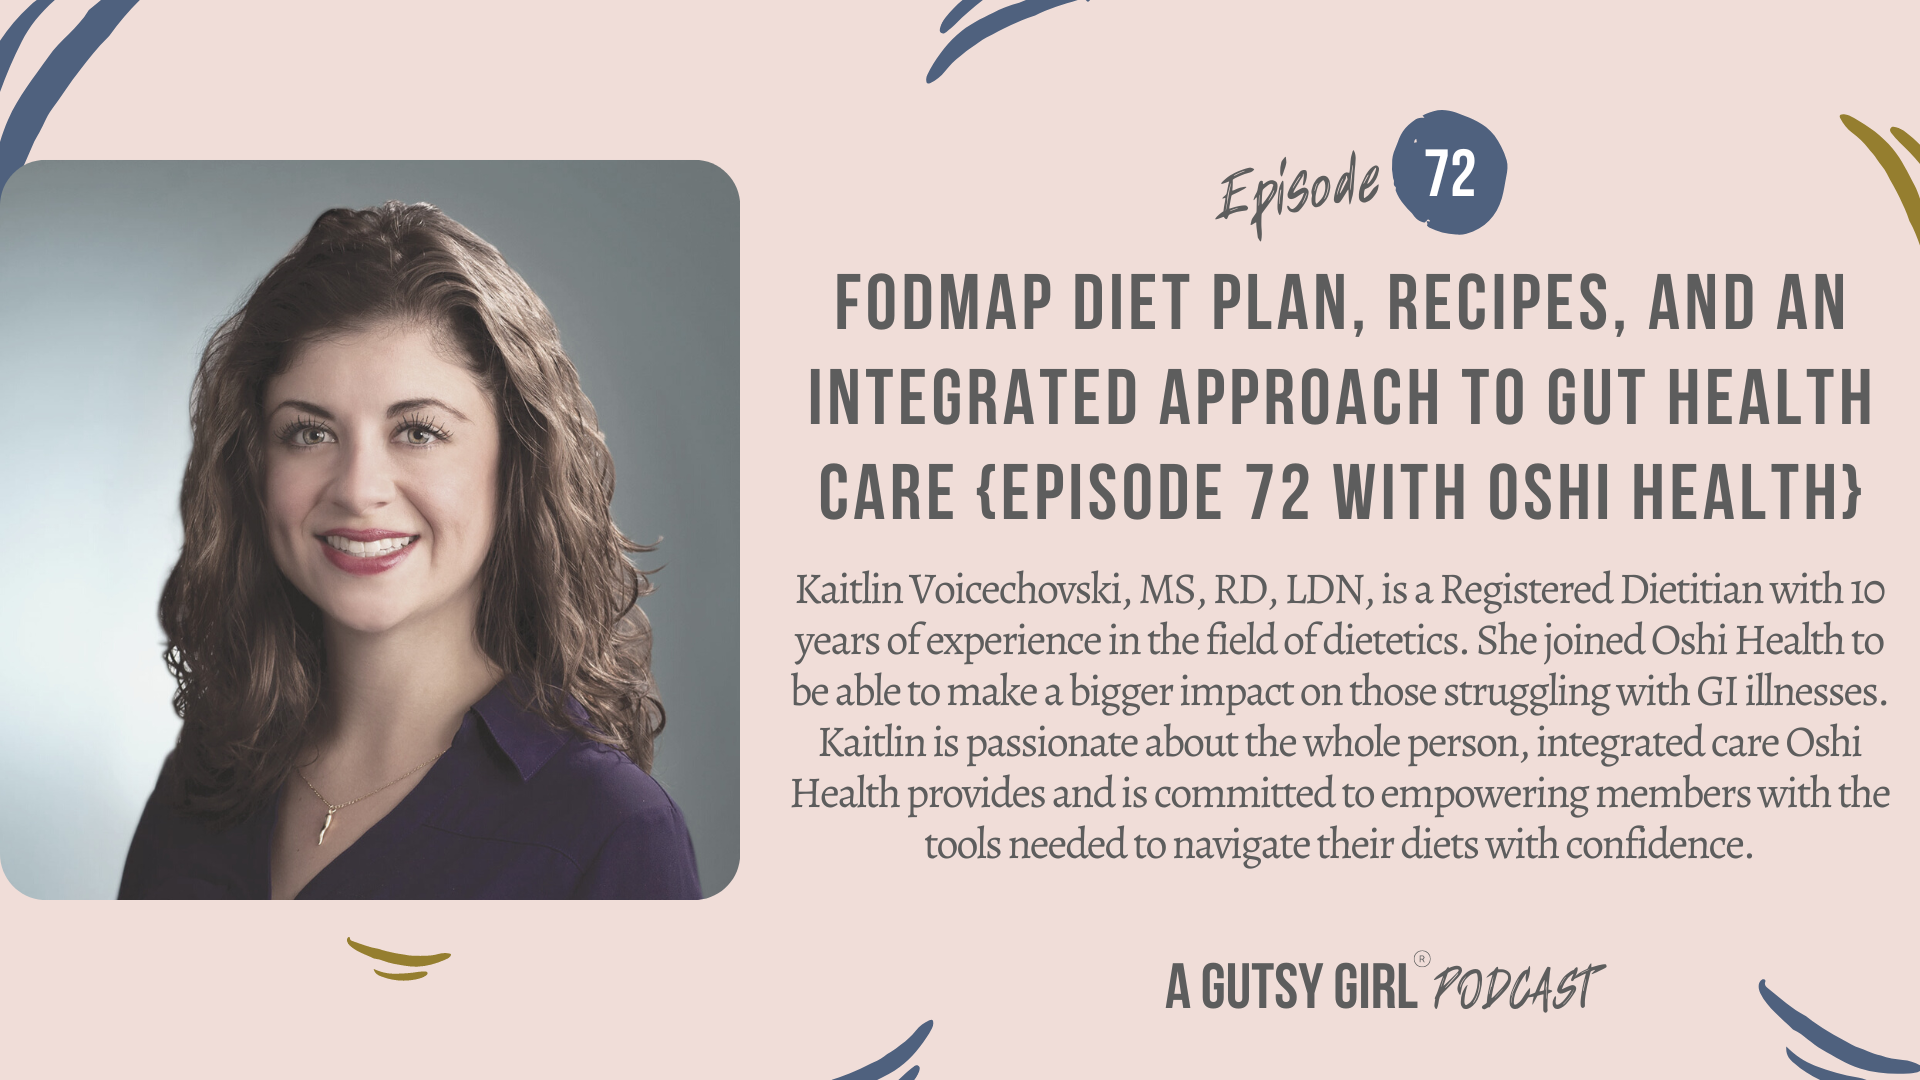 FODMAP Diet Plan, Recipes, and an Integrated Approach to Gut Health Care {Episode 72 with OSHI Health}